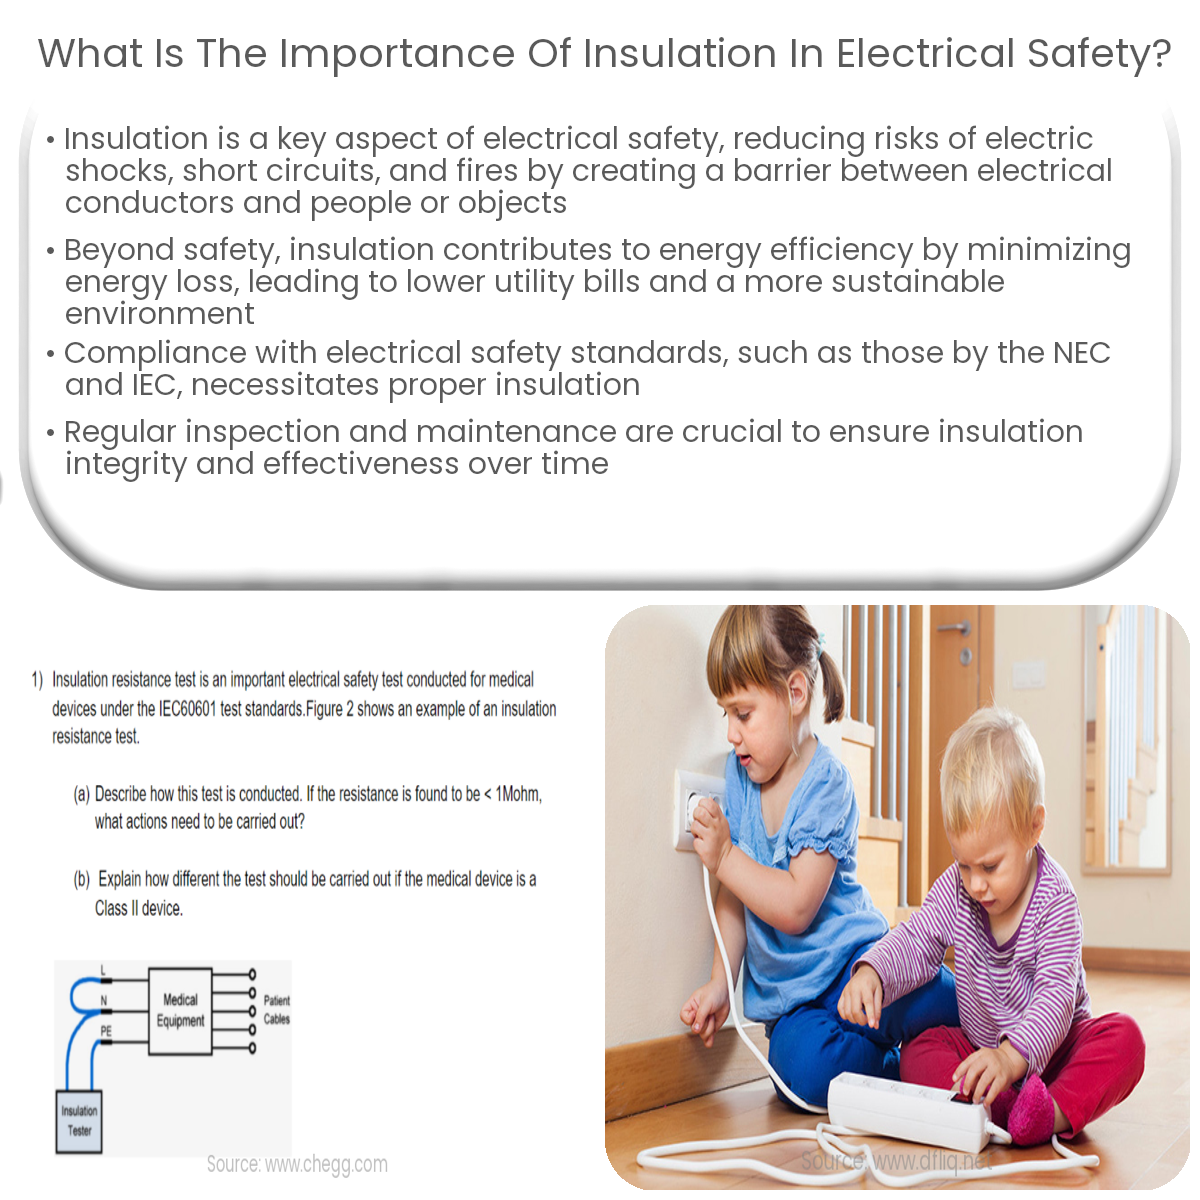 What is the importance of insulation in electrical safety?